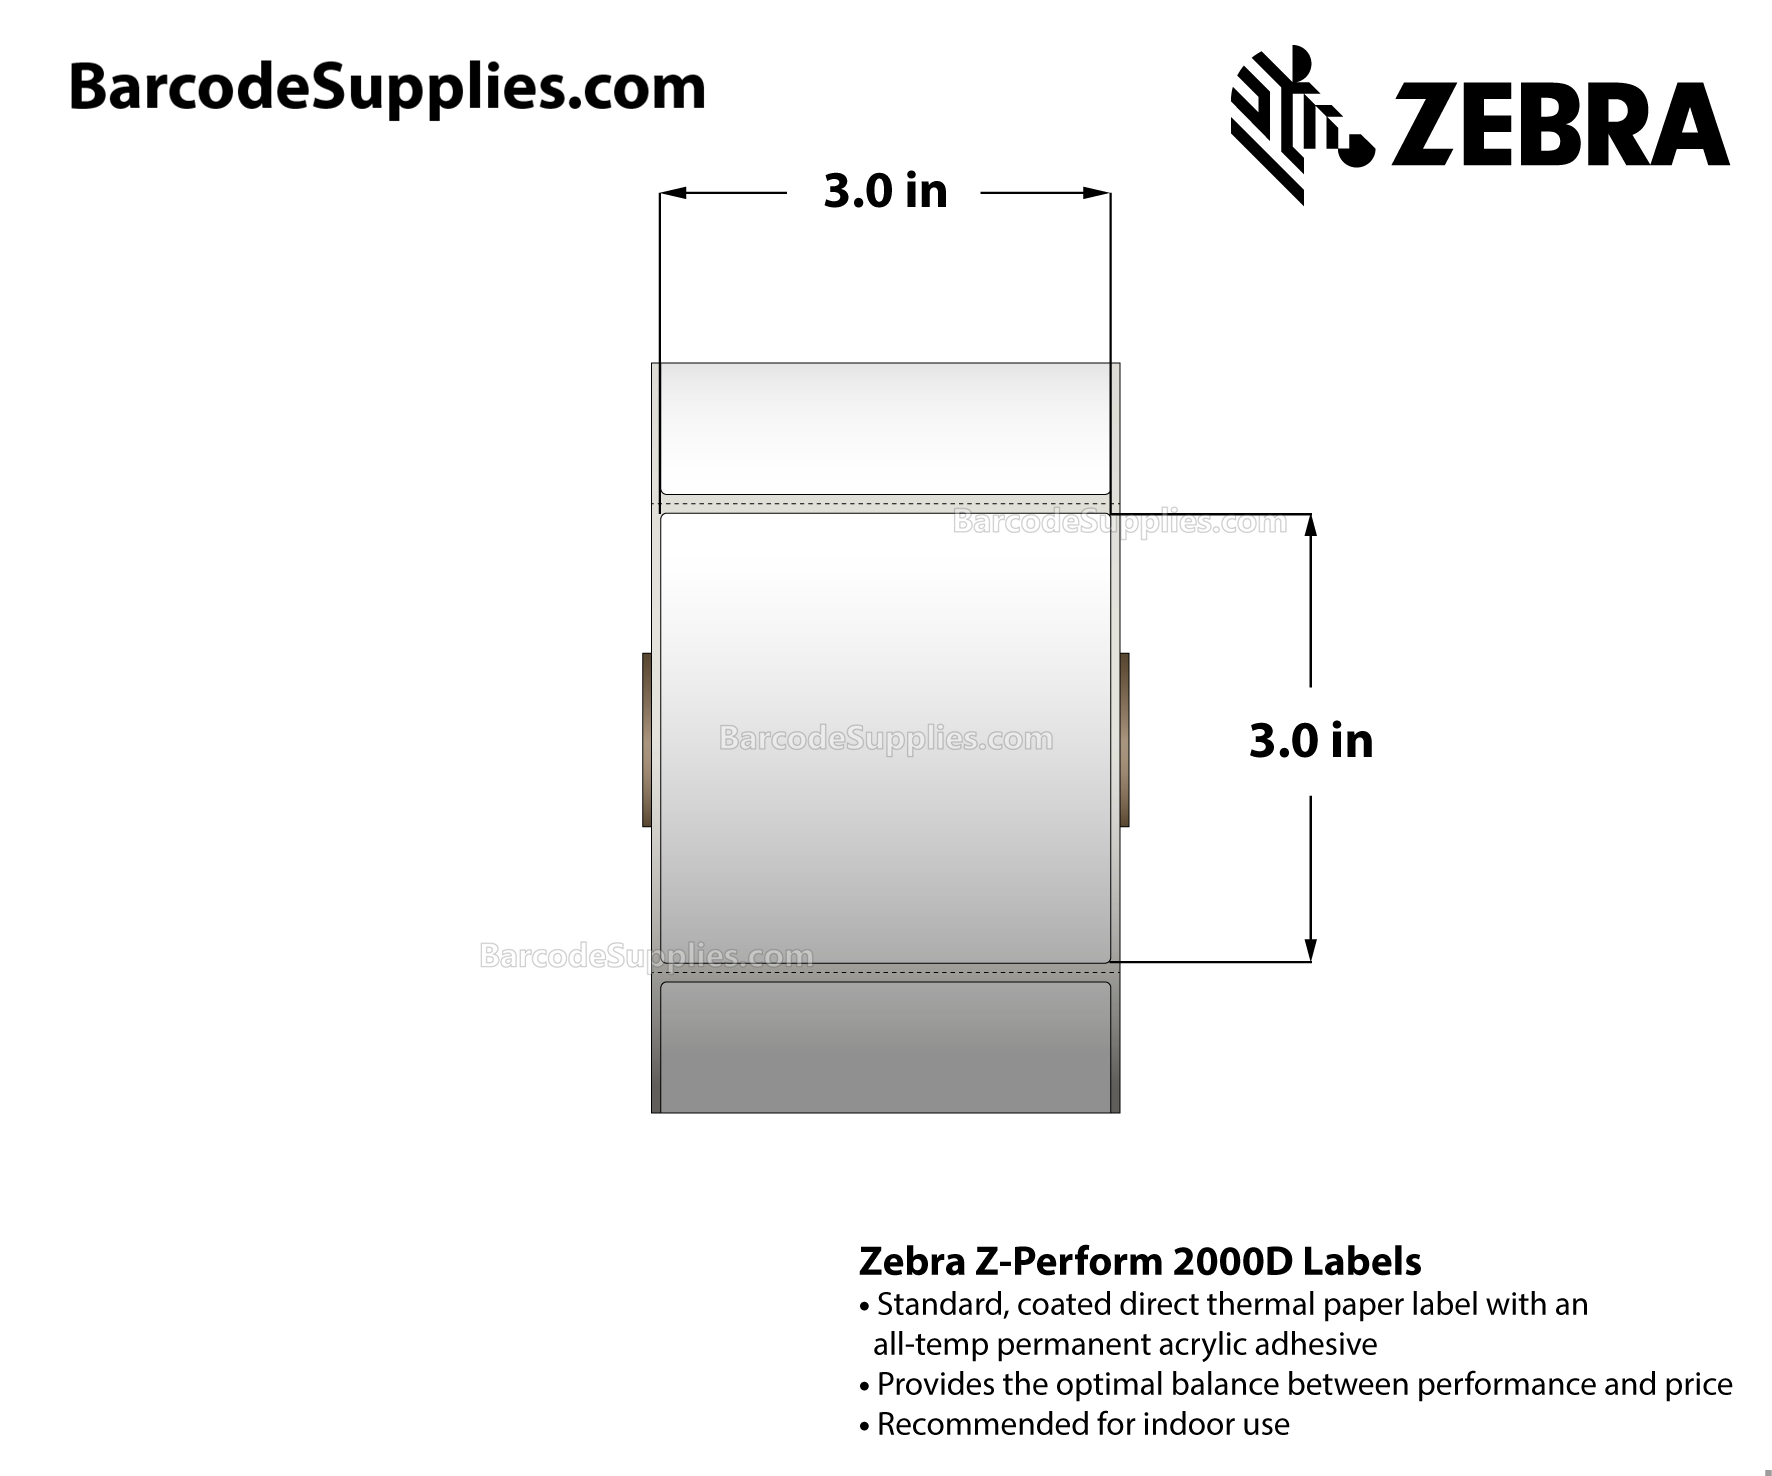 3 x 3 Direct Thermal White Z-Perform 2000D Labels With All-Temp Adhesive - Perforated - 840 Labels Per Roll - Carton Of 6 Rolls - 5040 Labels Total - MPN: 10010030